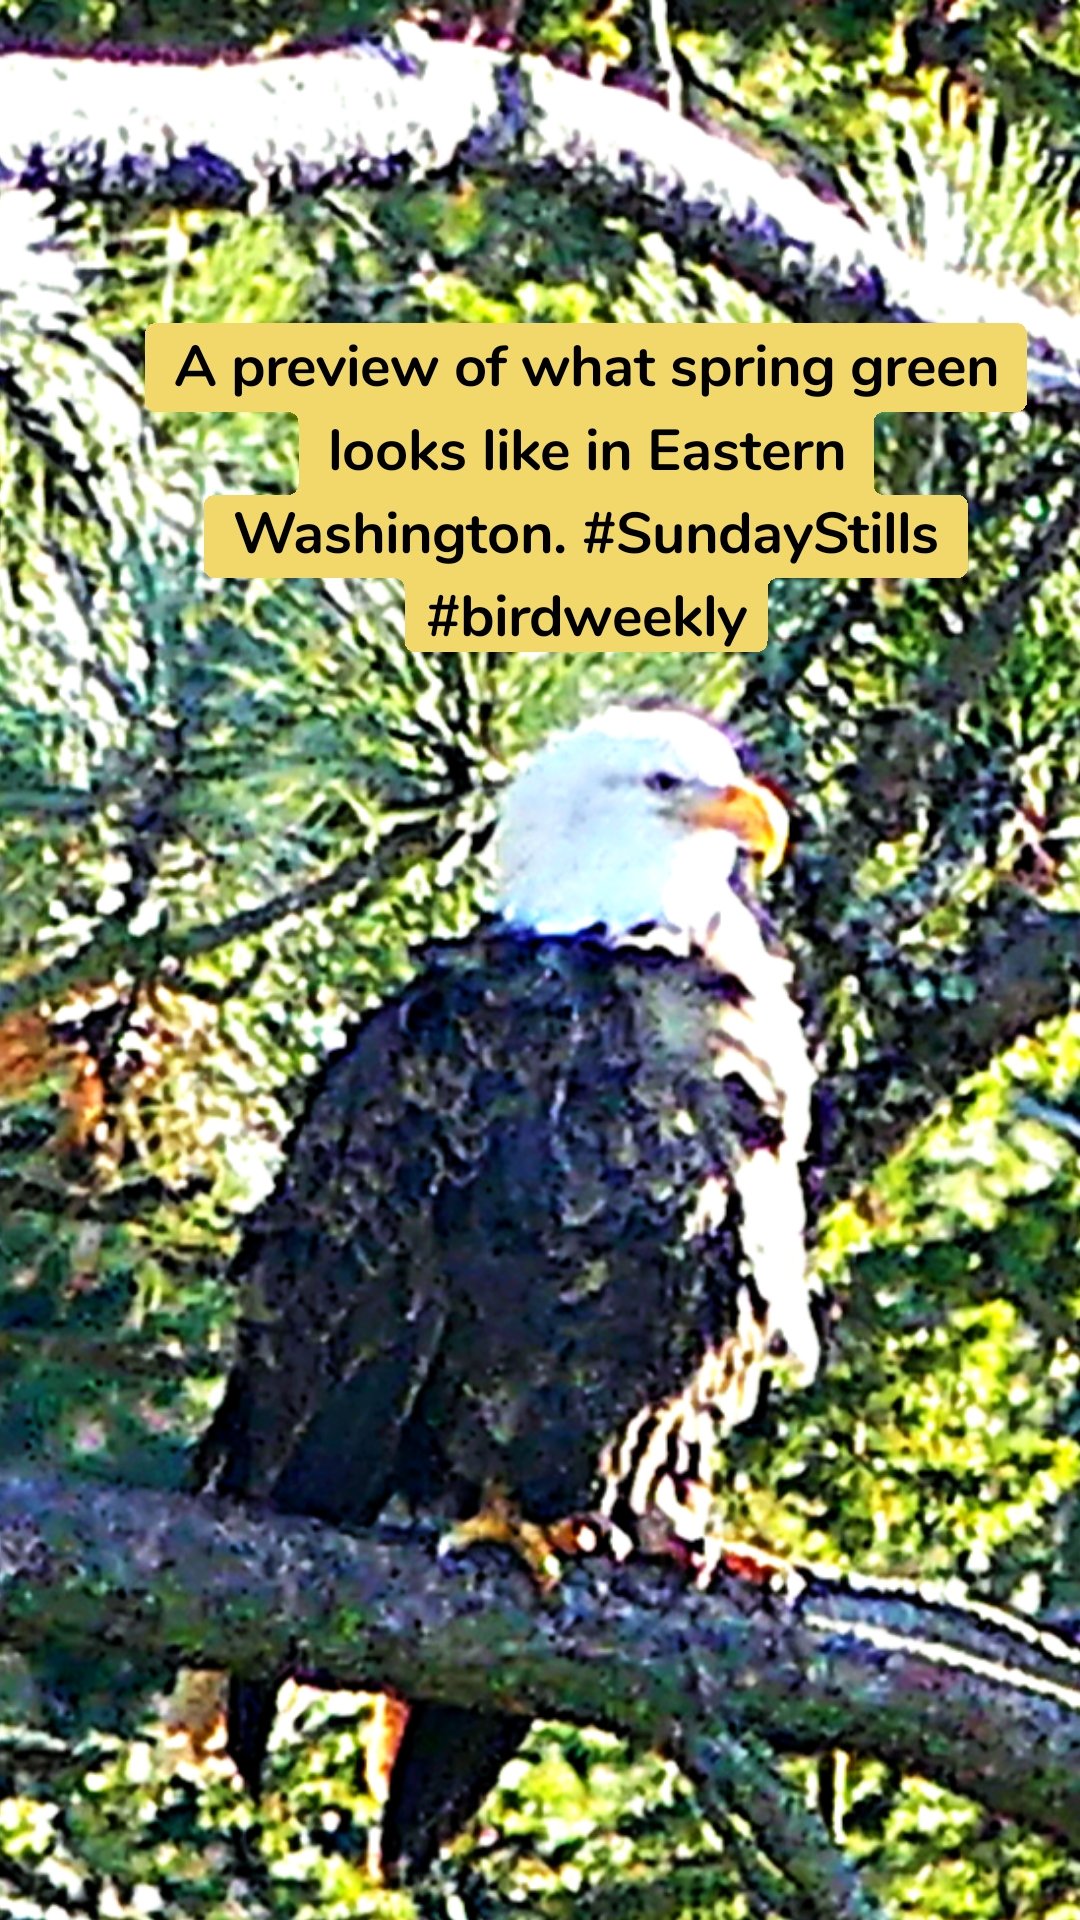 A preview of what spring green looks like in Eastern Washington. #SundayStills #birdweekly